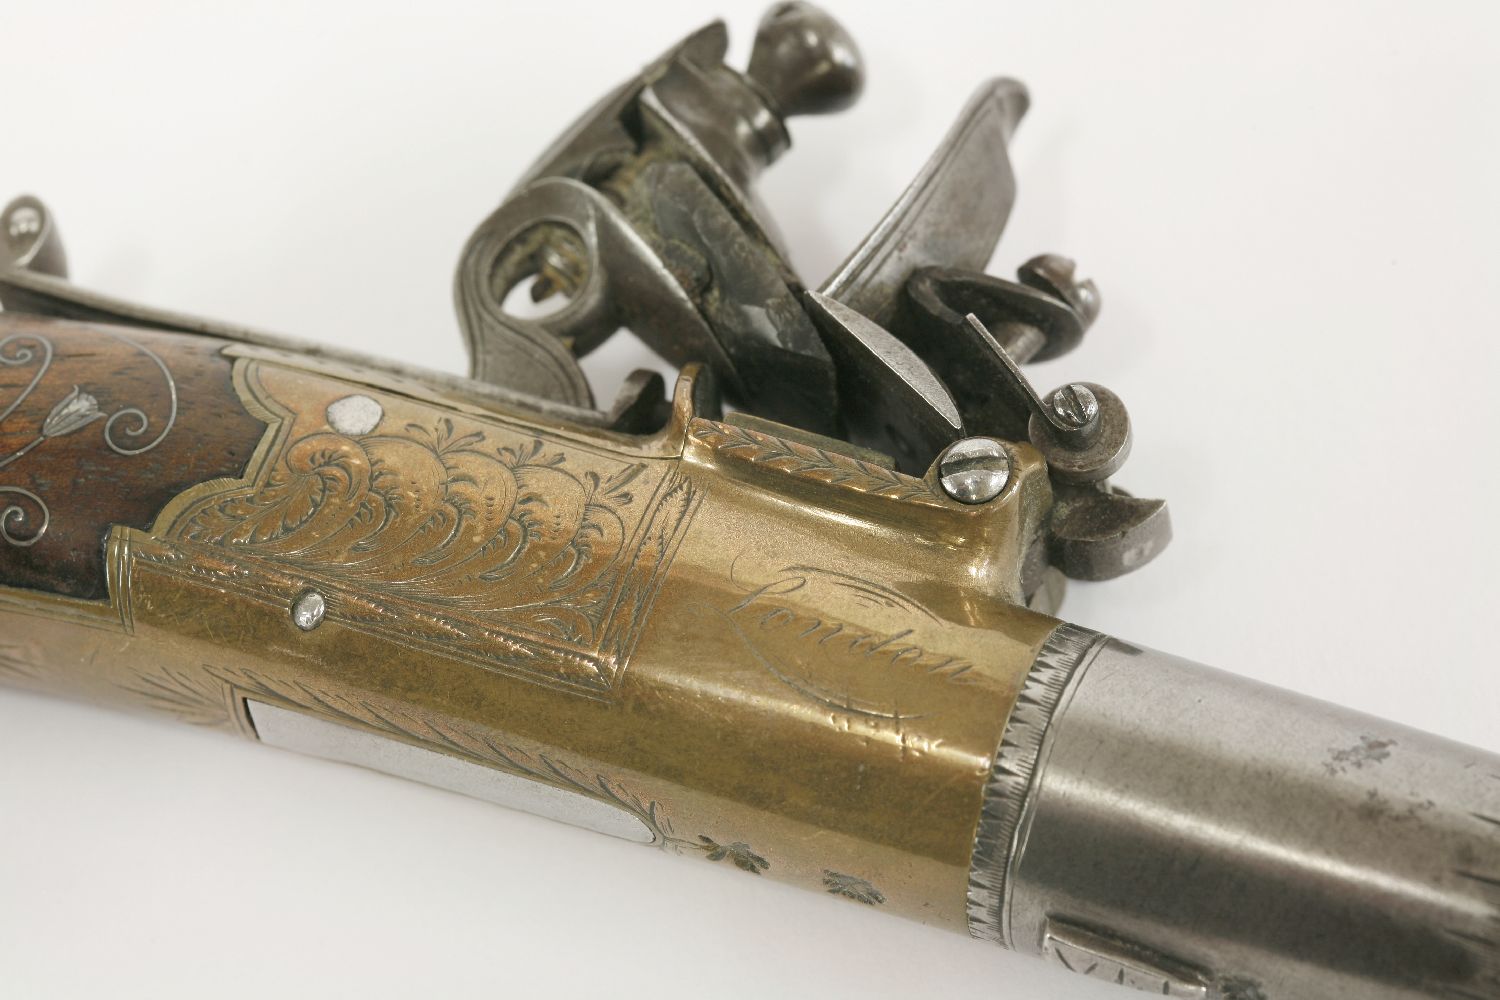 A flintlock pocket pistol, c.1800, by Smith, London, with turn-off barrel and brass stock, - Image 3 of 4